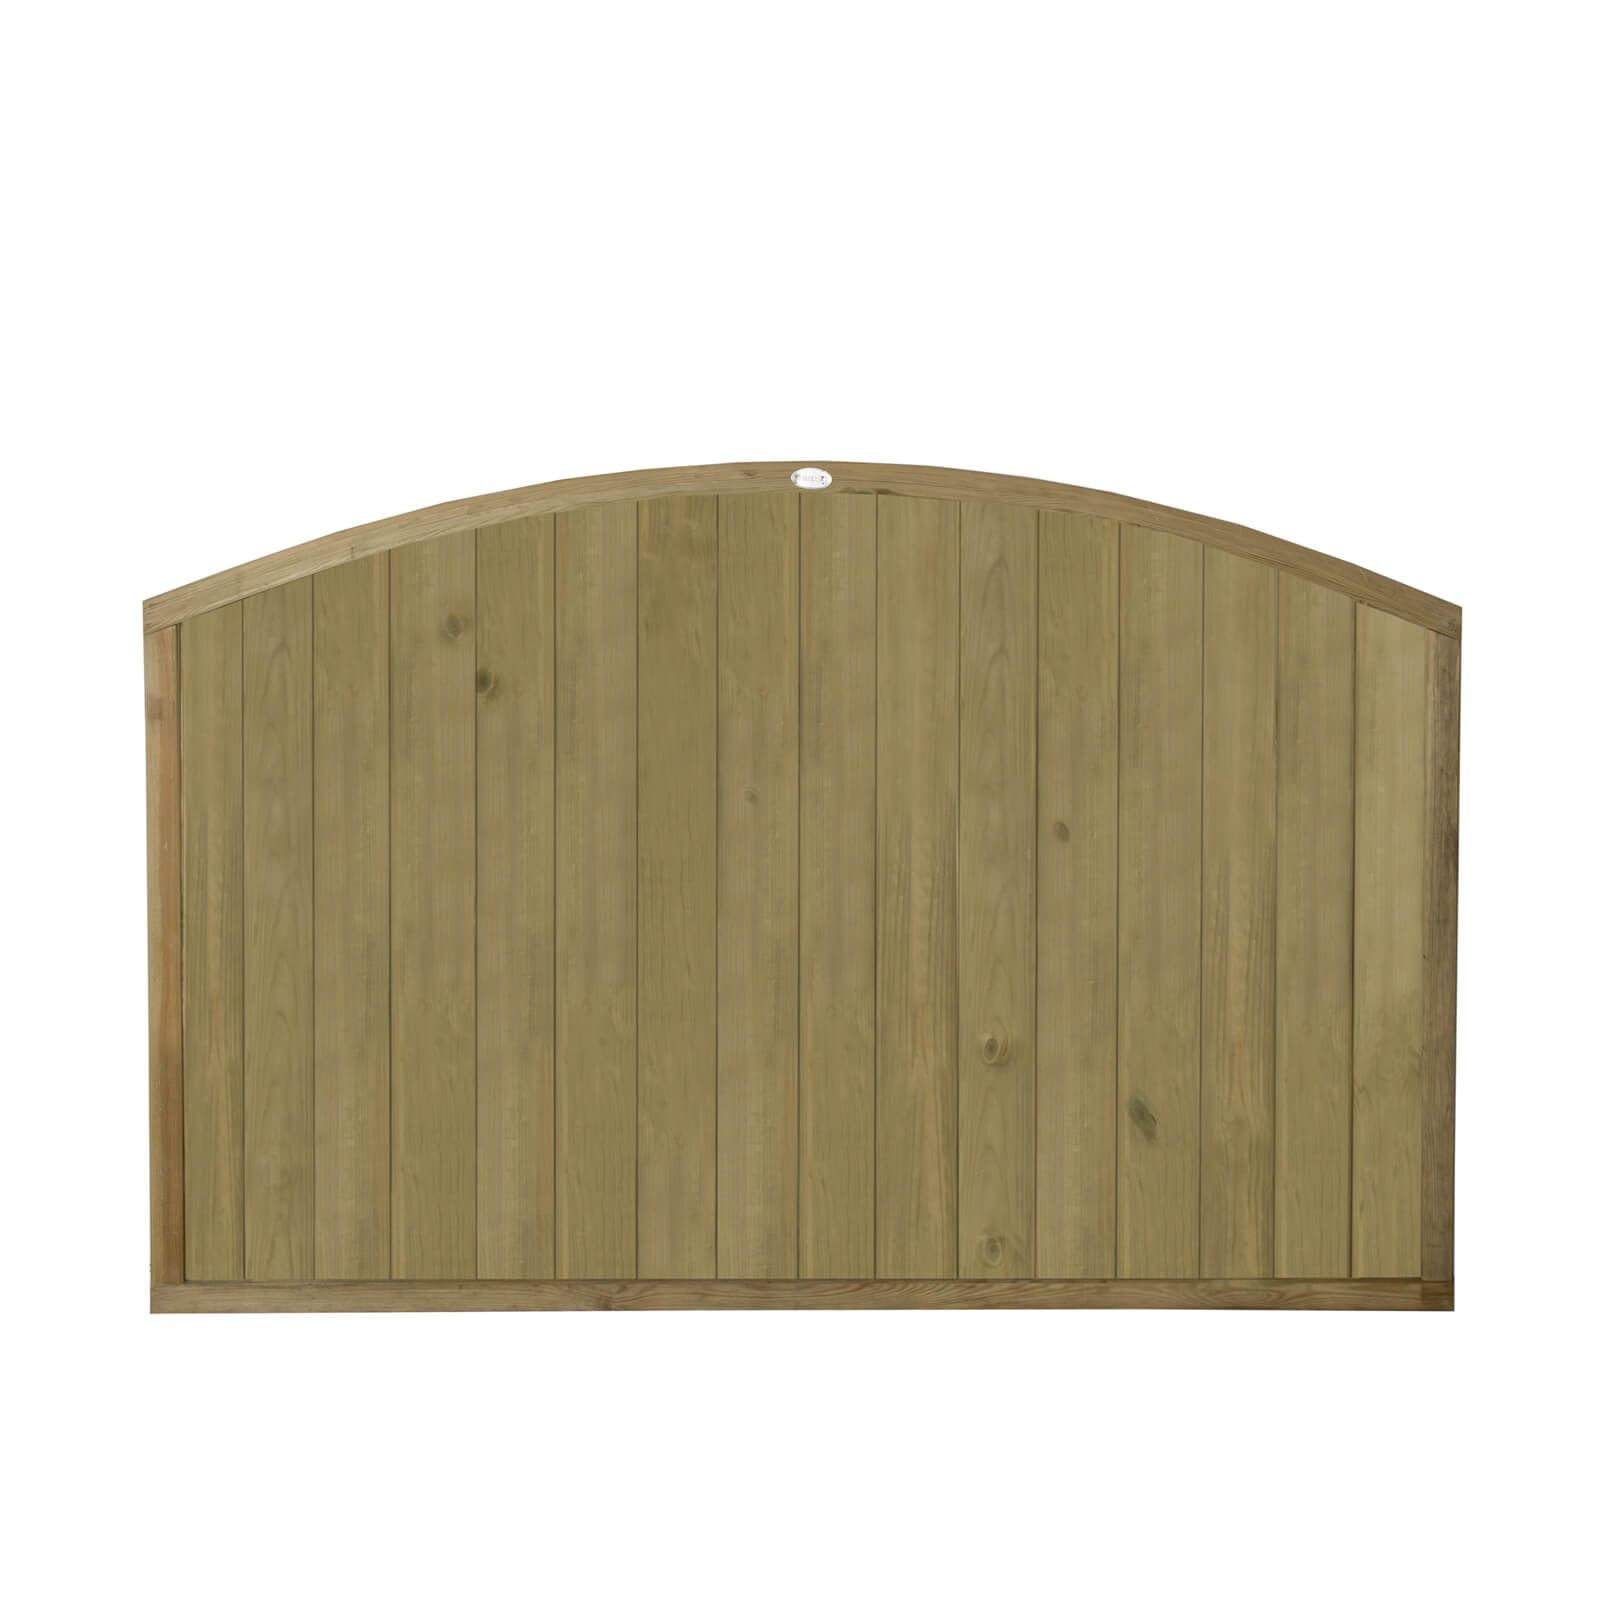 Forest Dome Tongue and Groove Panel - 4ft - Pack of 5